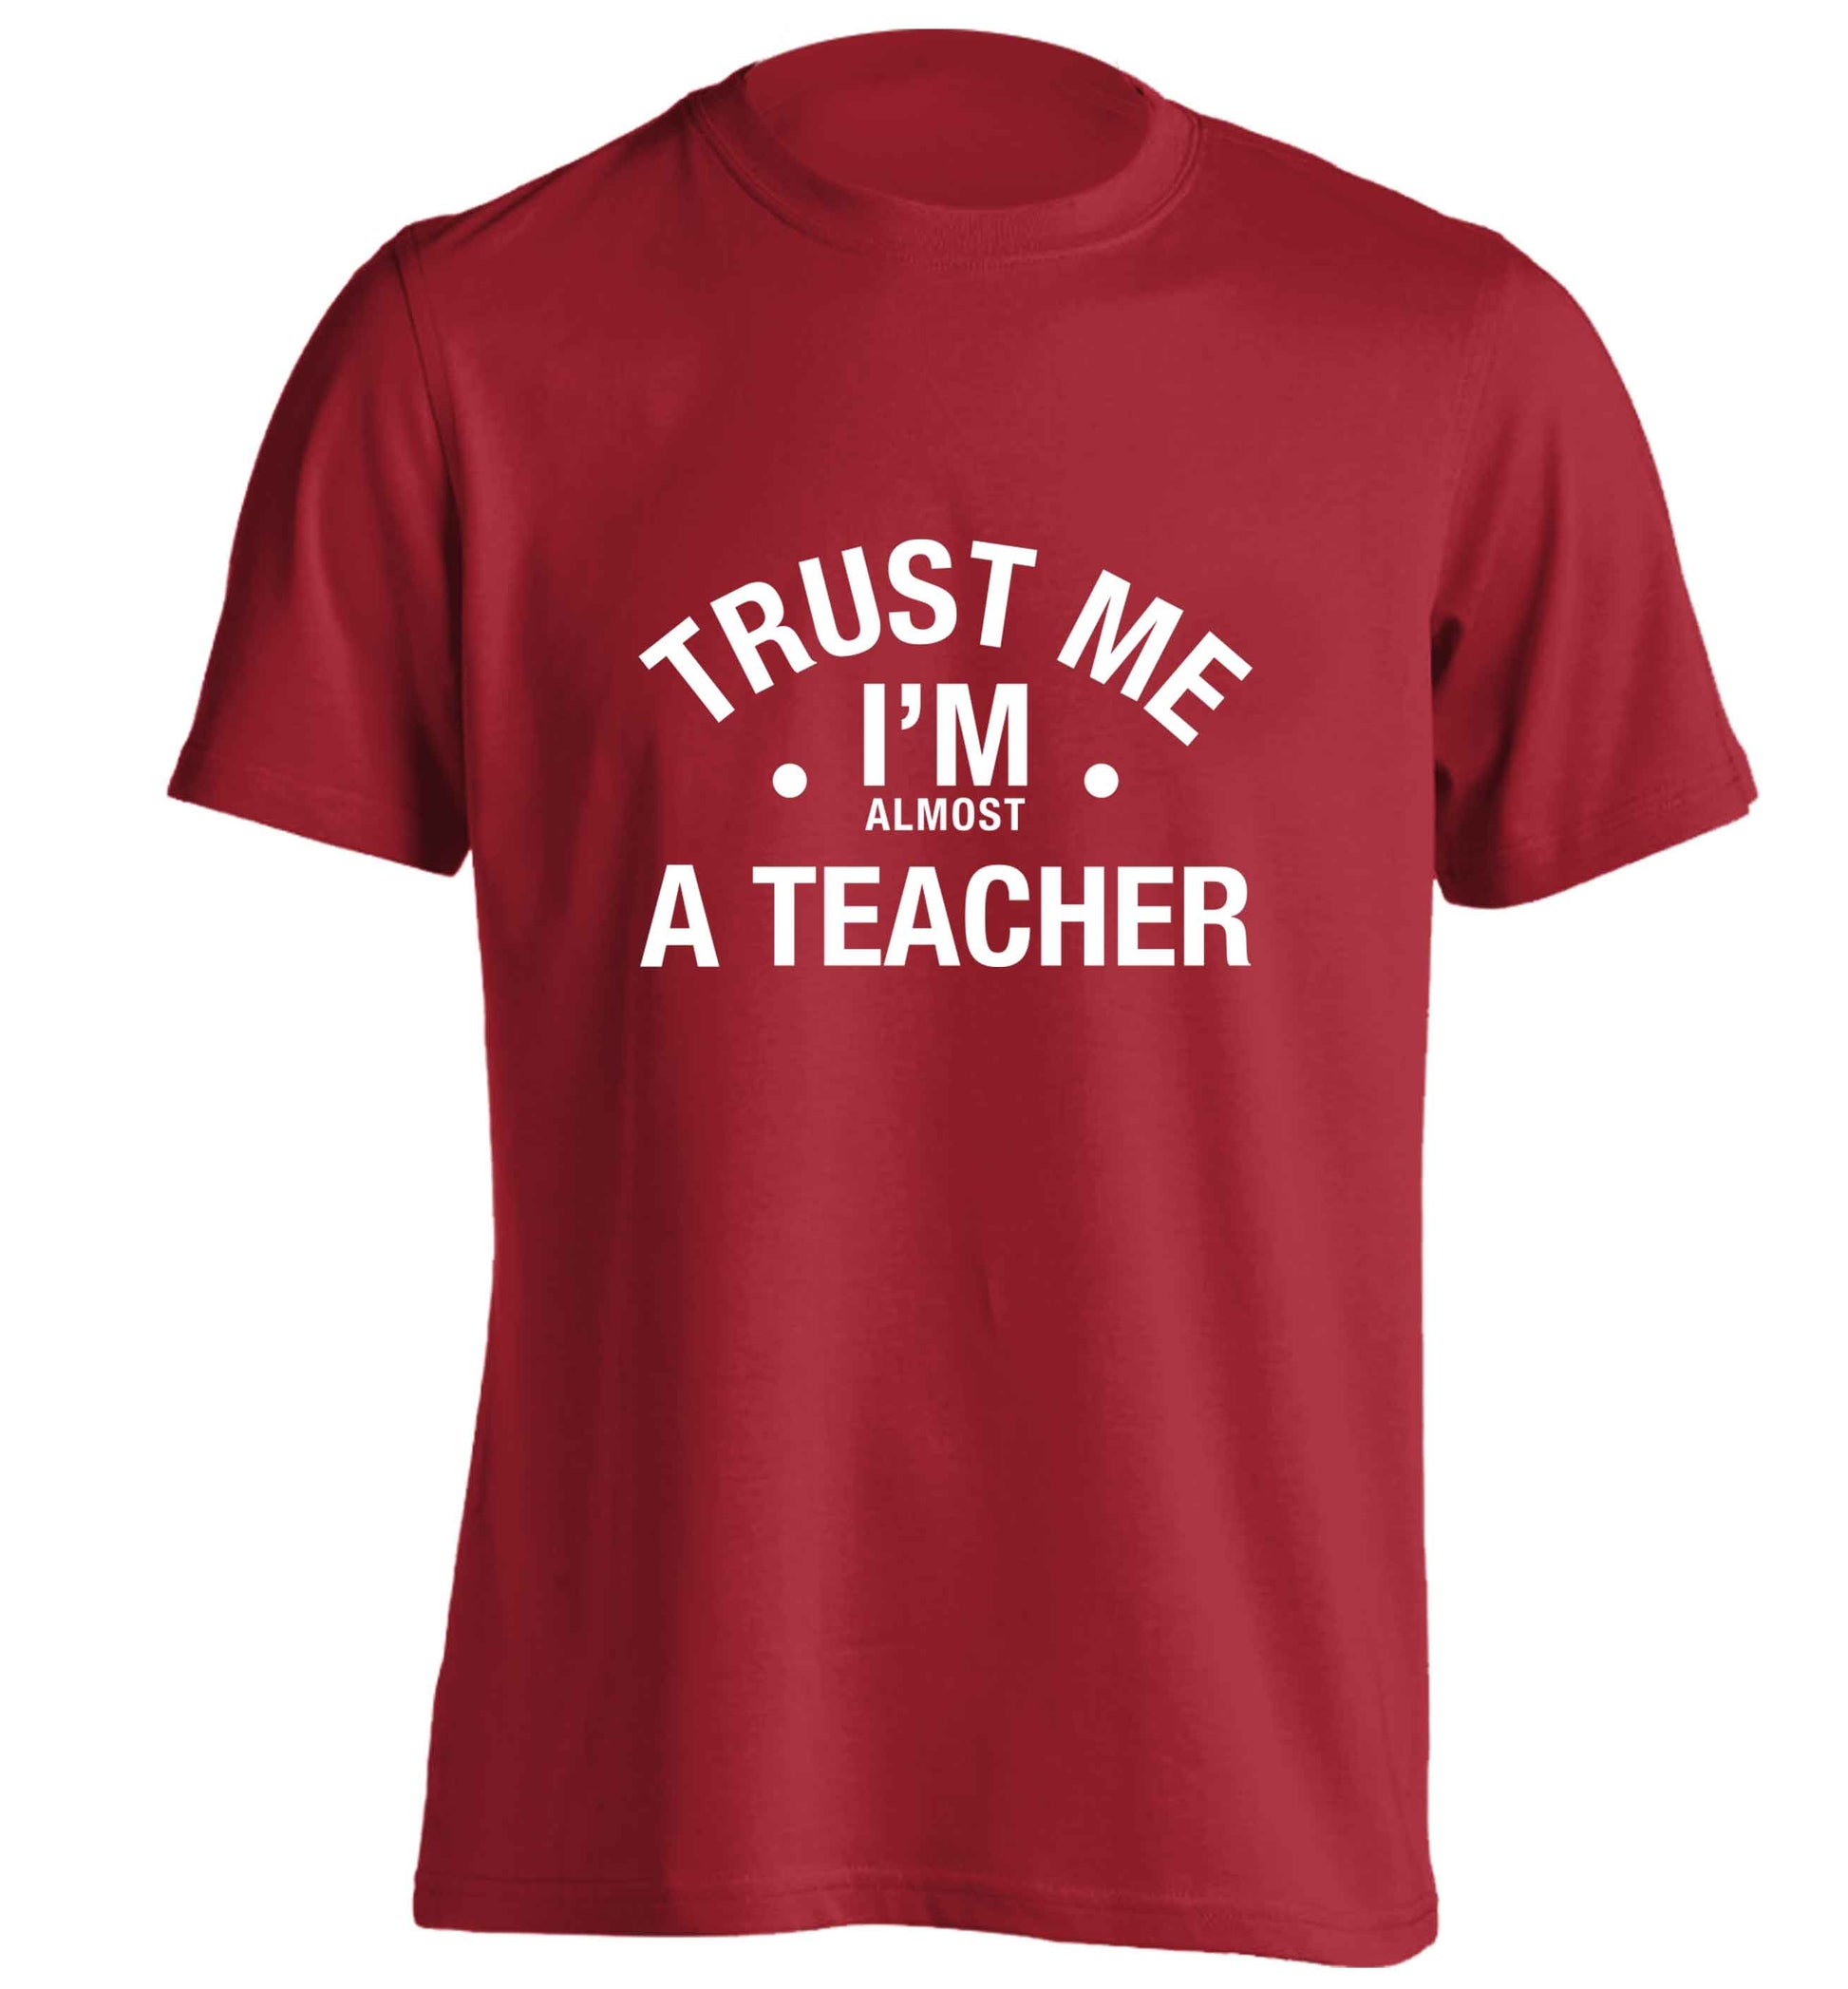 Trust me I'm almost a teacher adults unisex red Tshirt 2XL